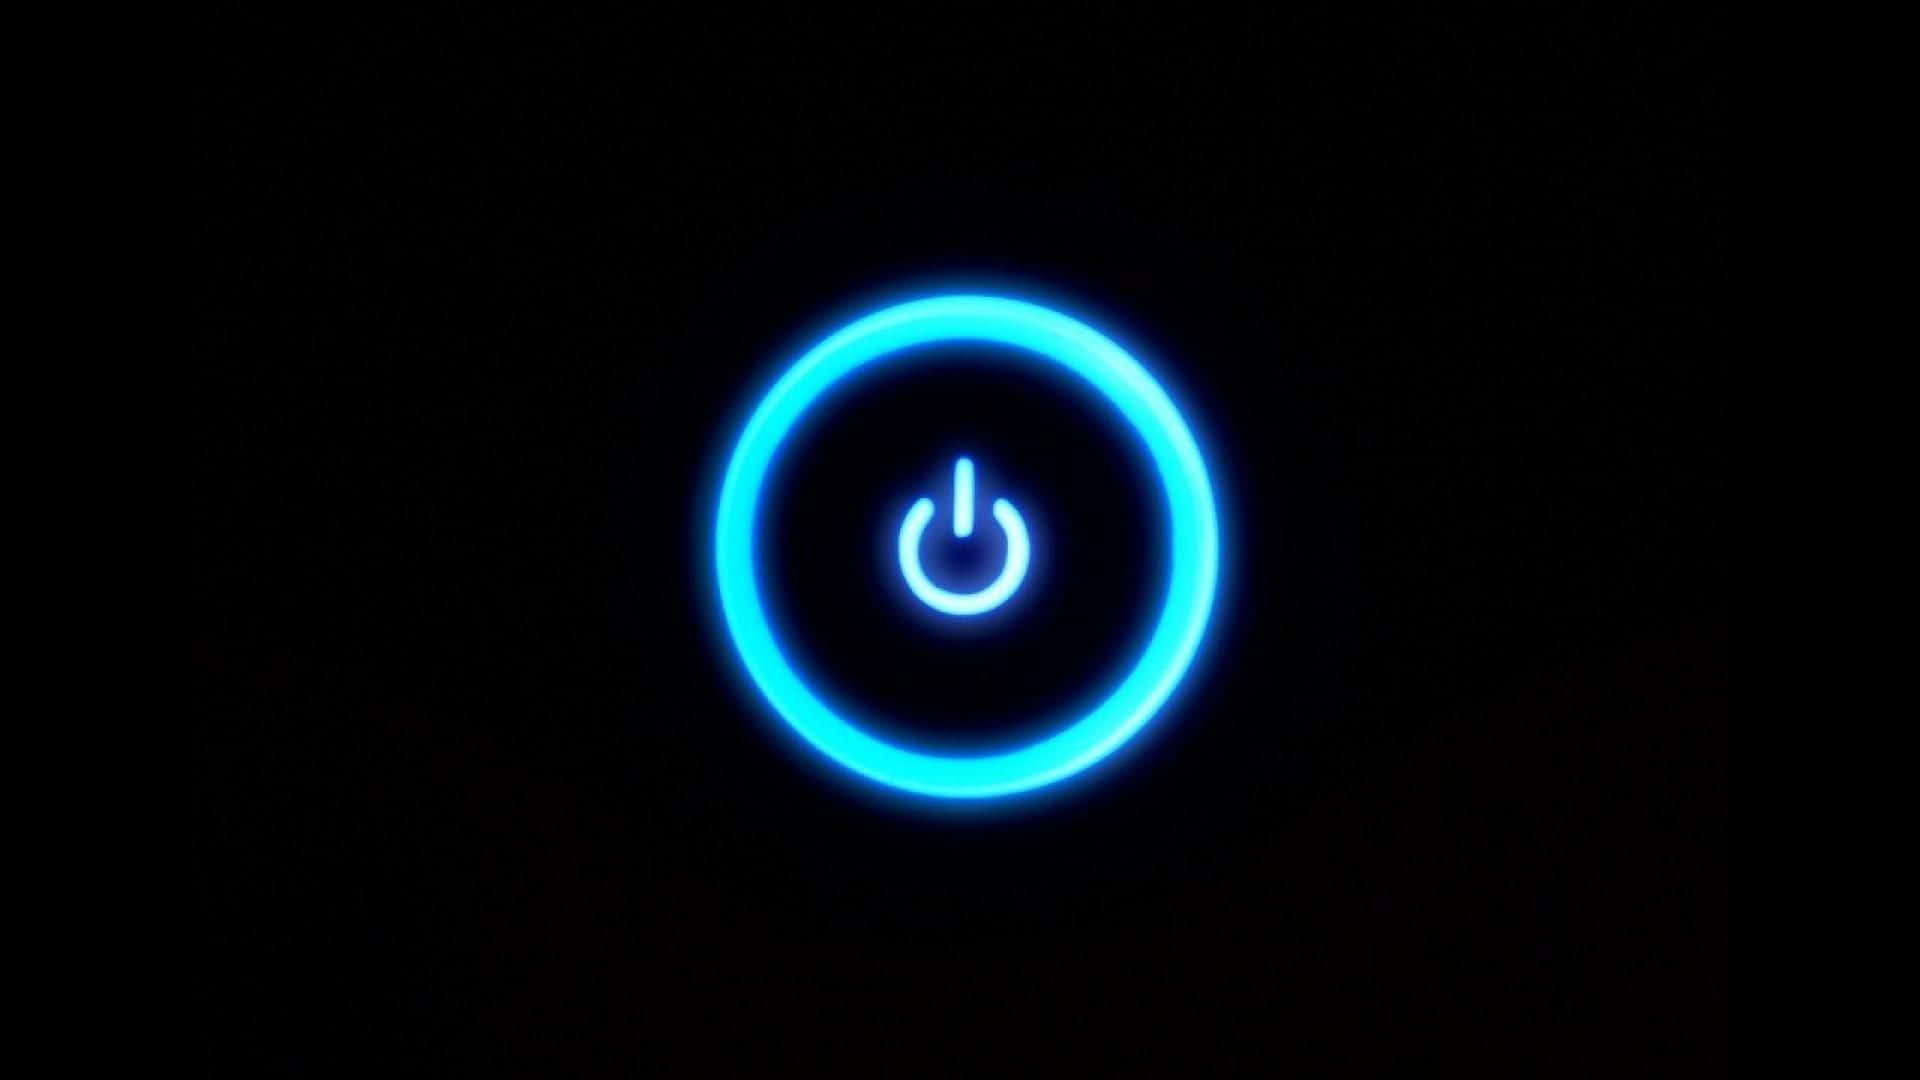 A Blue Light Is Shown On A Black Background Wallpaper